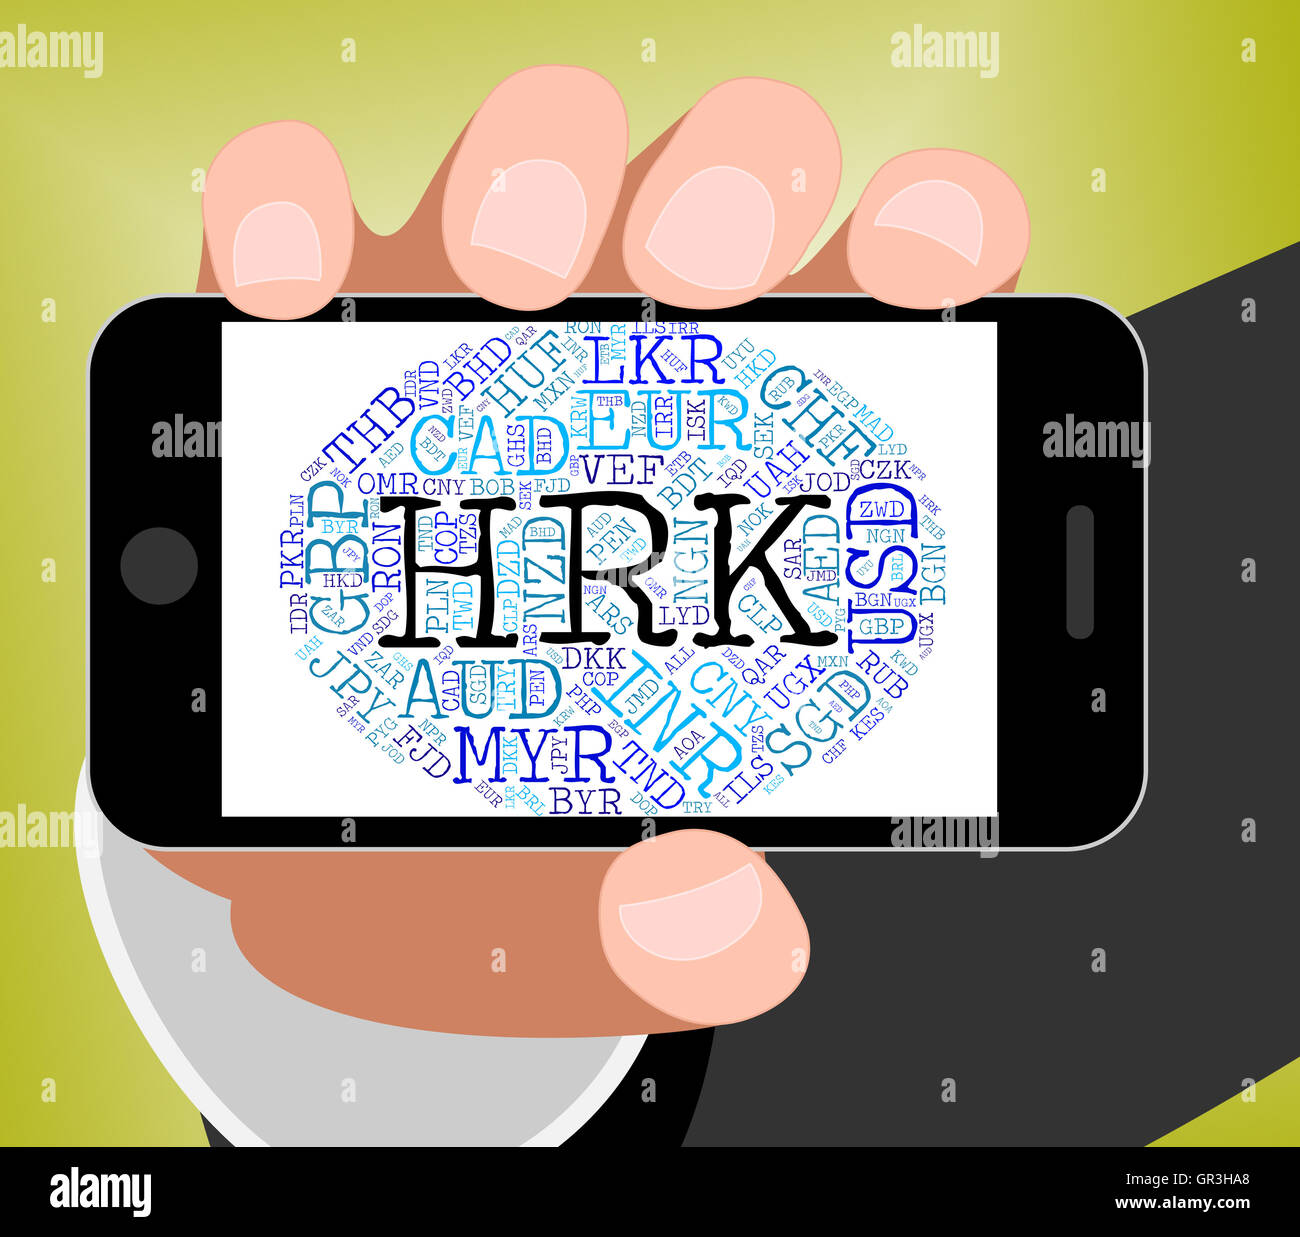 Hrk Currency Representing Foreign Exchange And Coin Stock Photo